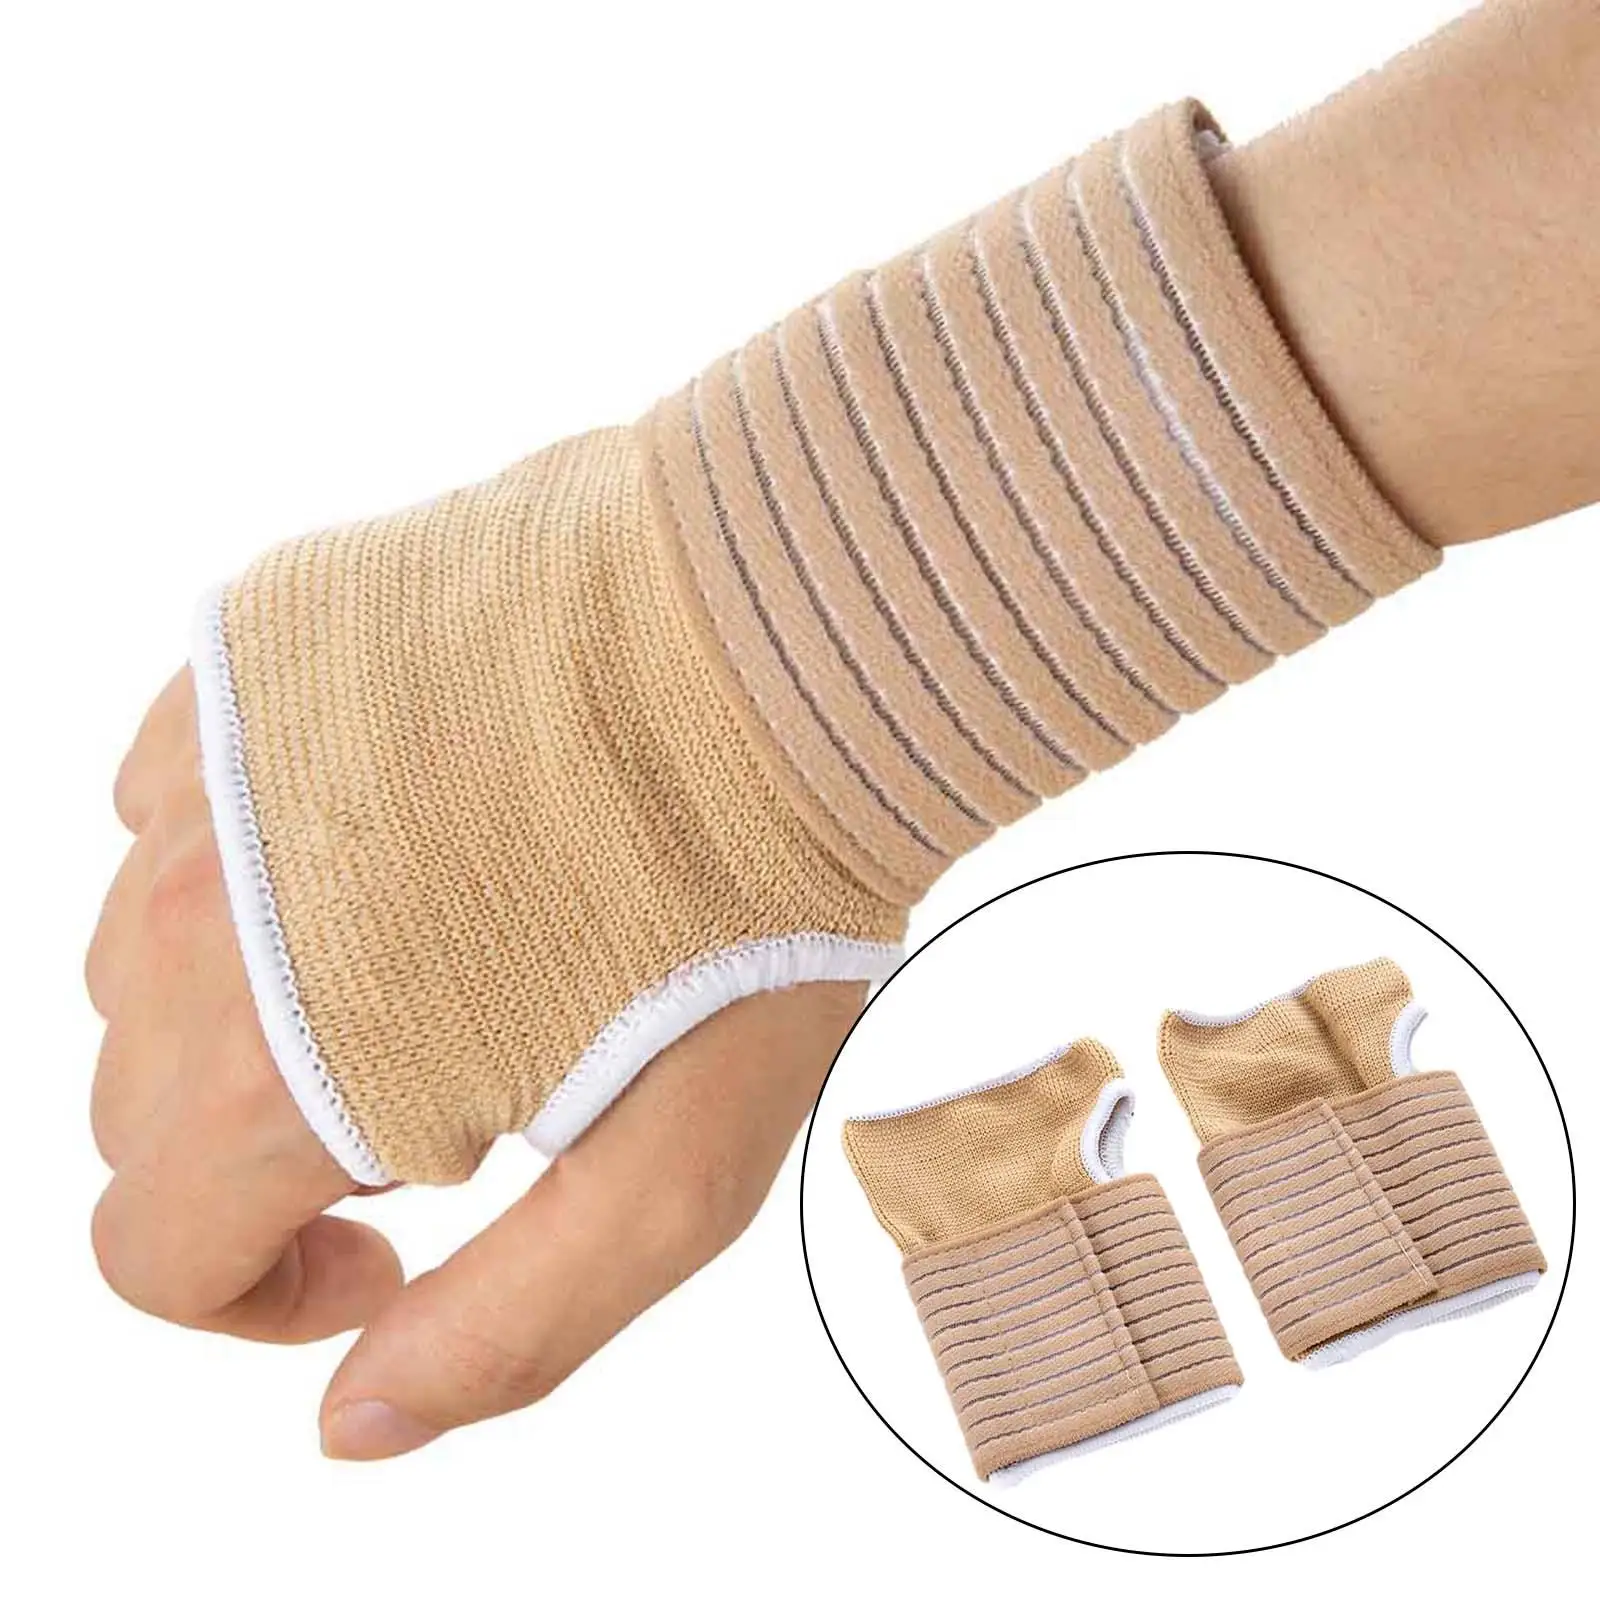 5xWrist Sleeve Protective Hand Palm Support for Football Fitness Weightlifting